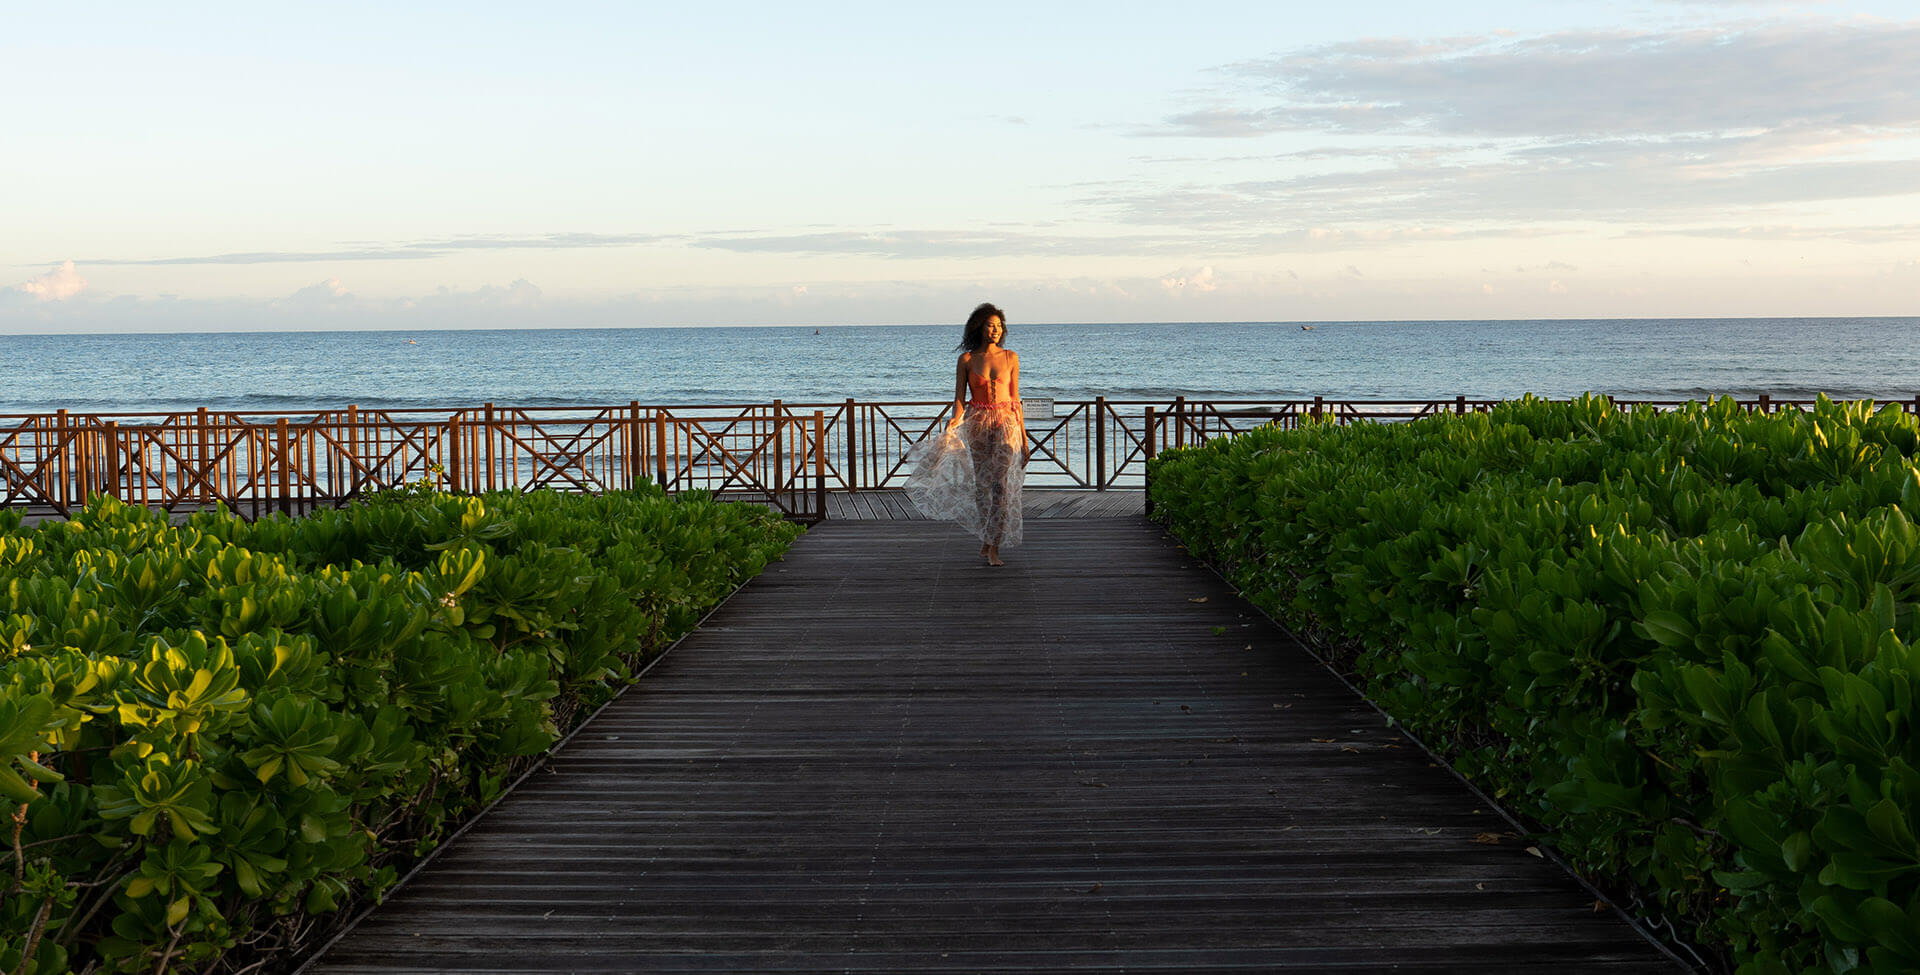 A woman walking on a wooden walkway by the water